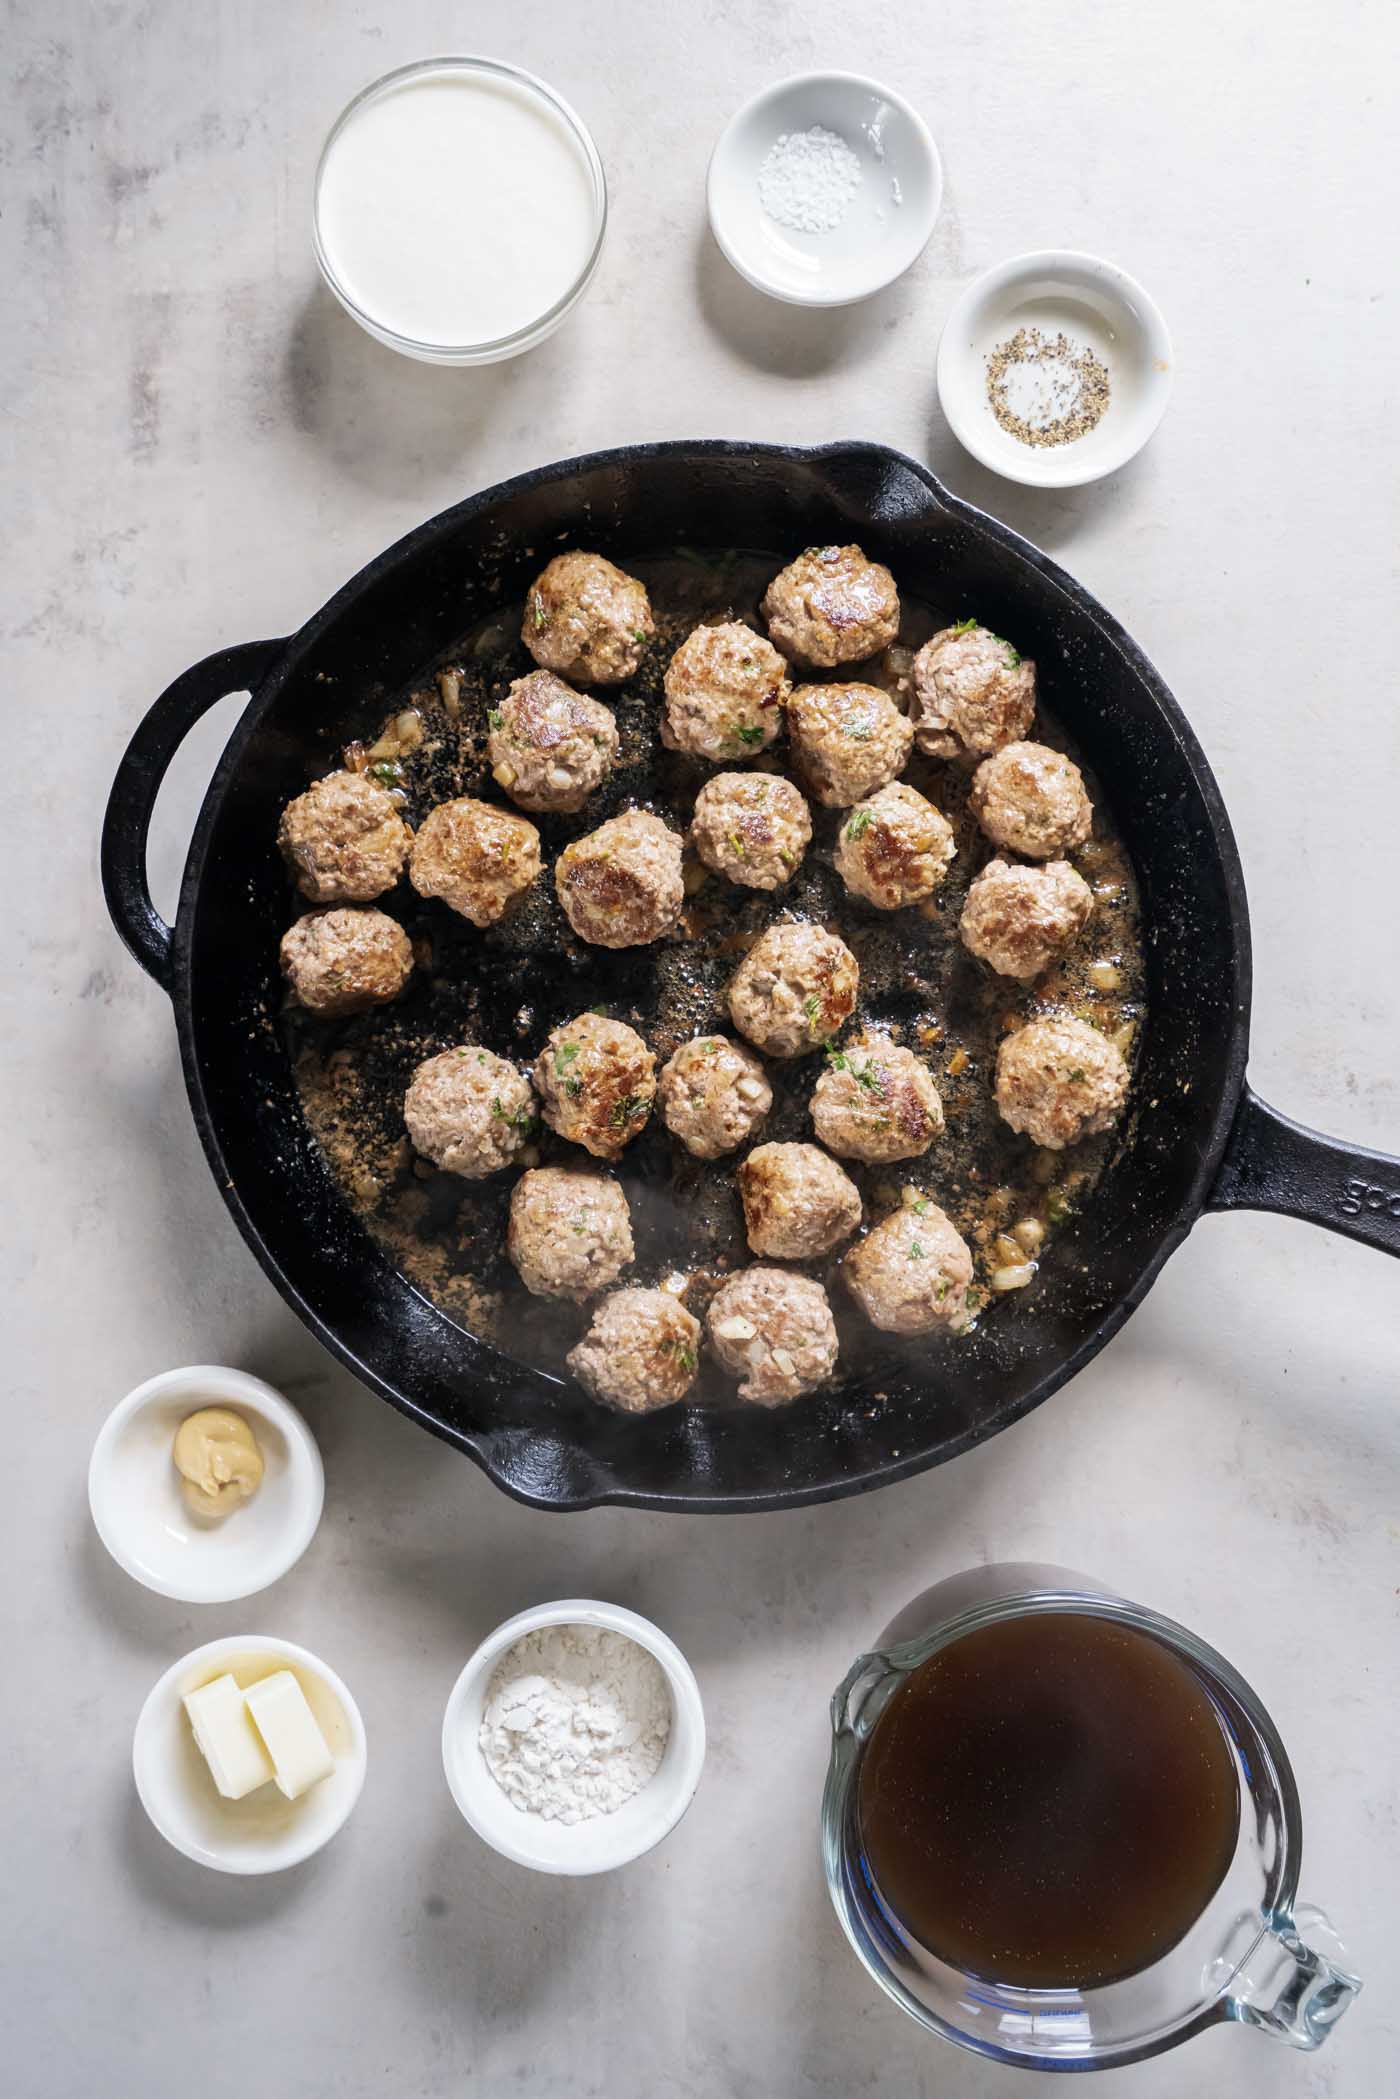 Browning meatballs in cast iron skillet.